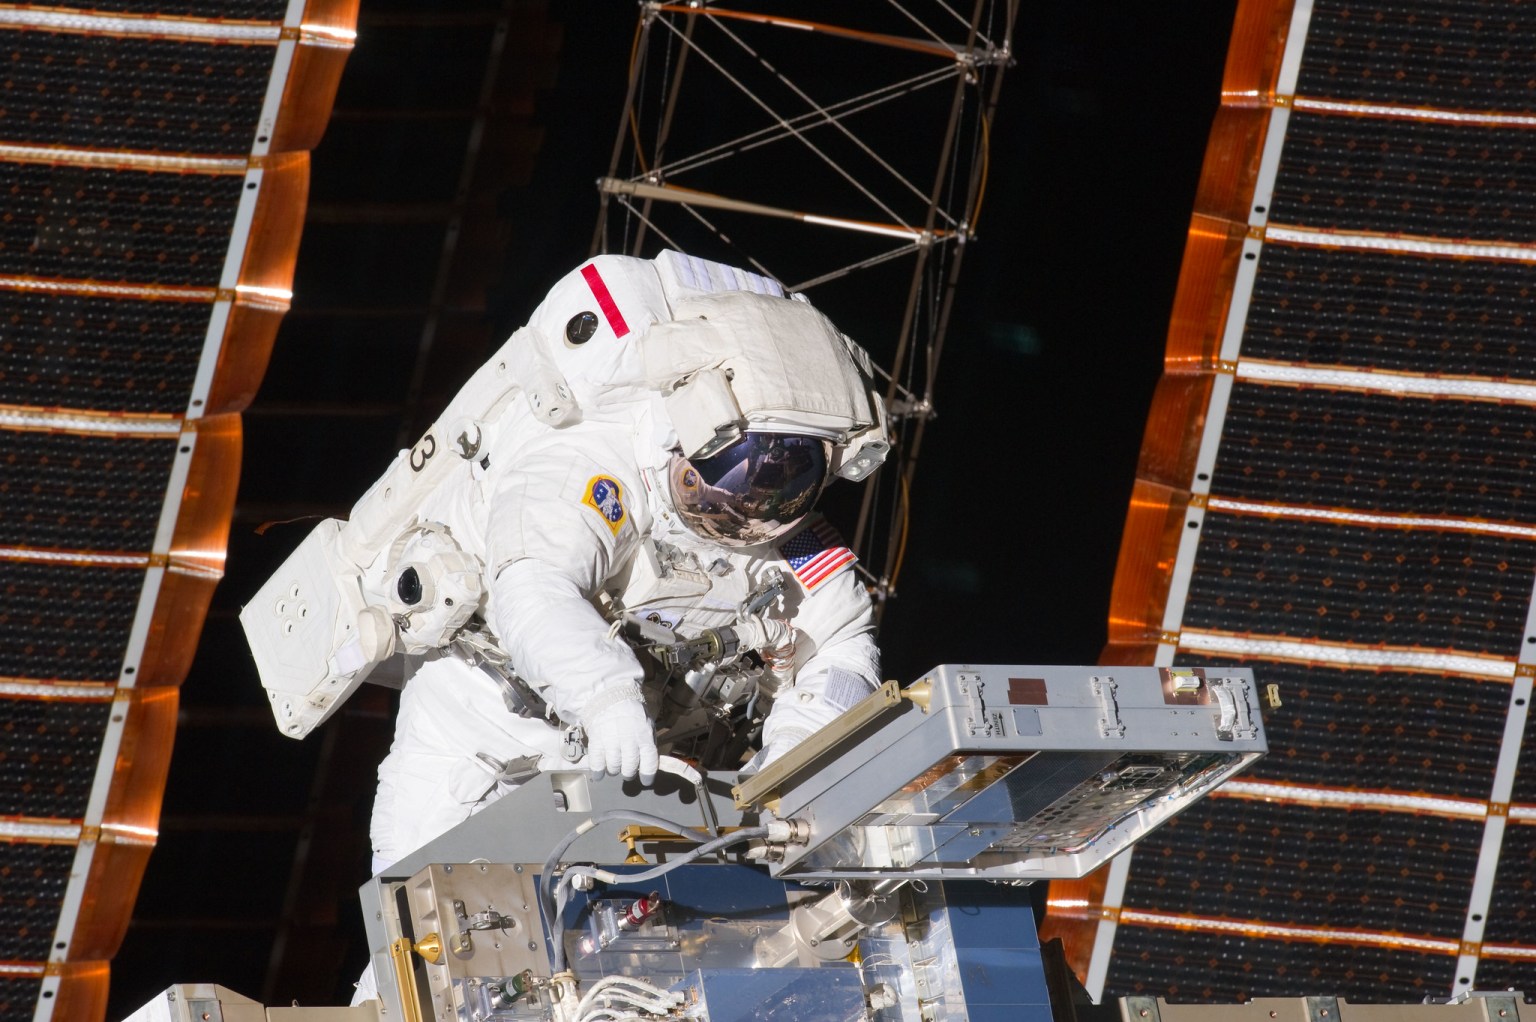 NASA astronaut Andrew Feustel, STS-134 mission specialist, participates in the mission's first session of extravehicular activity (EVA) as construction and maintenance continue on the International Space Station. 